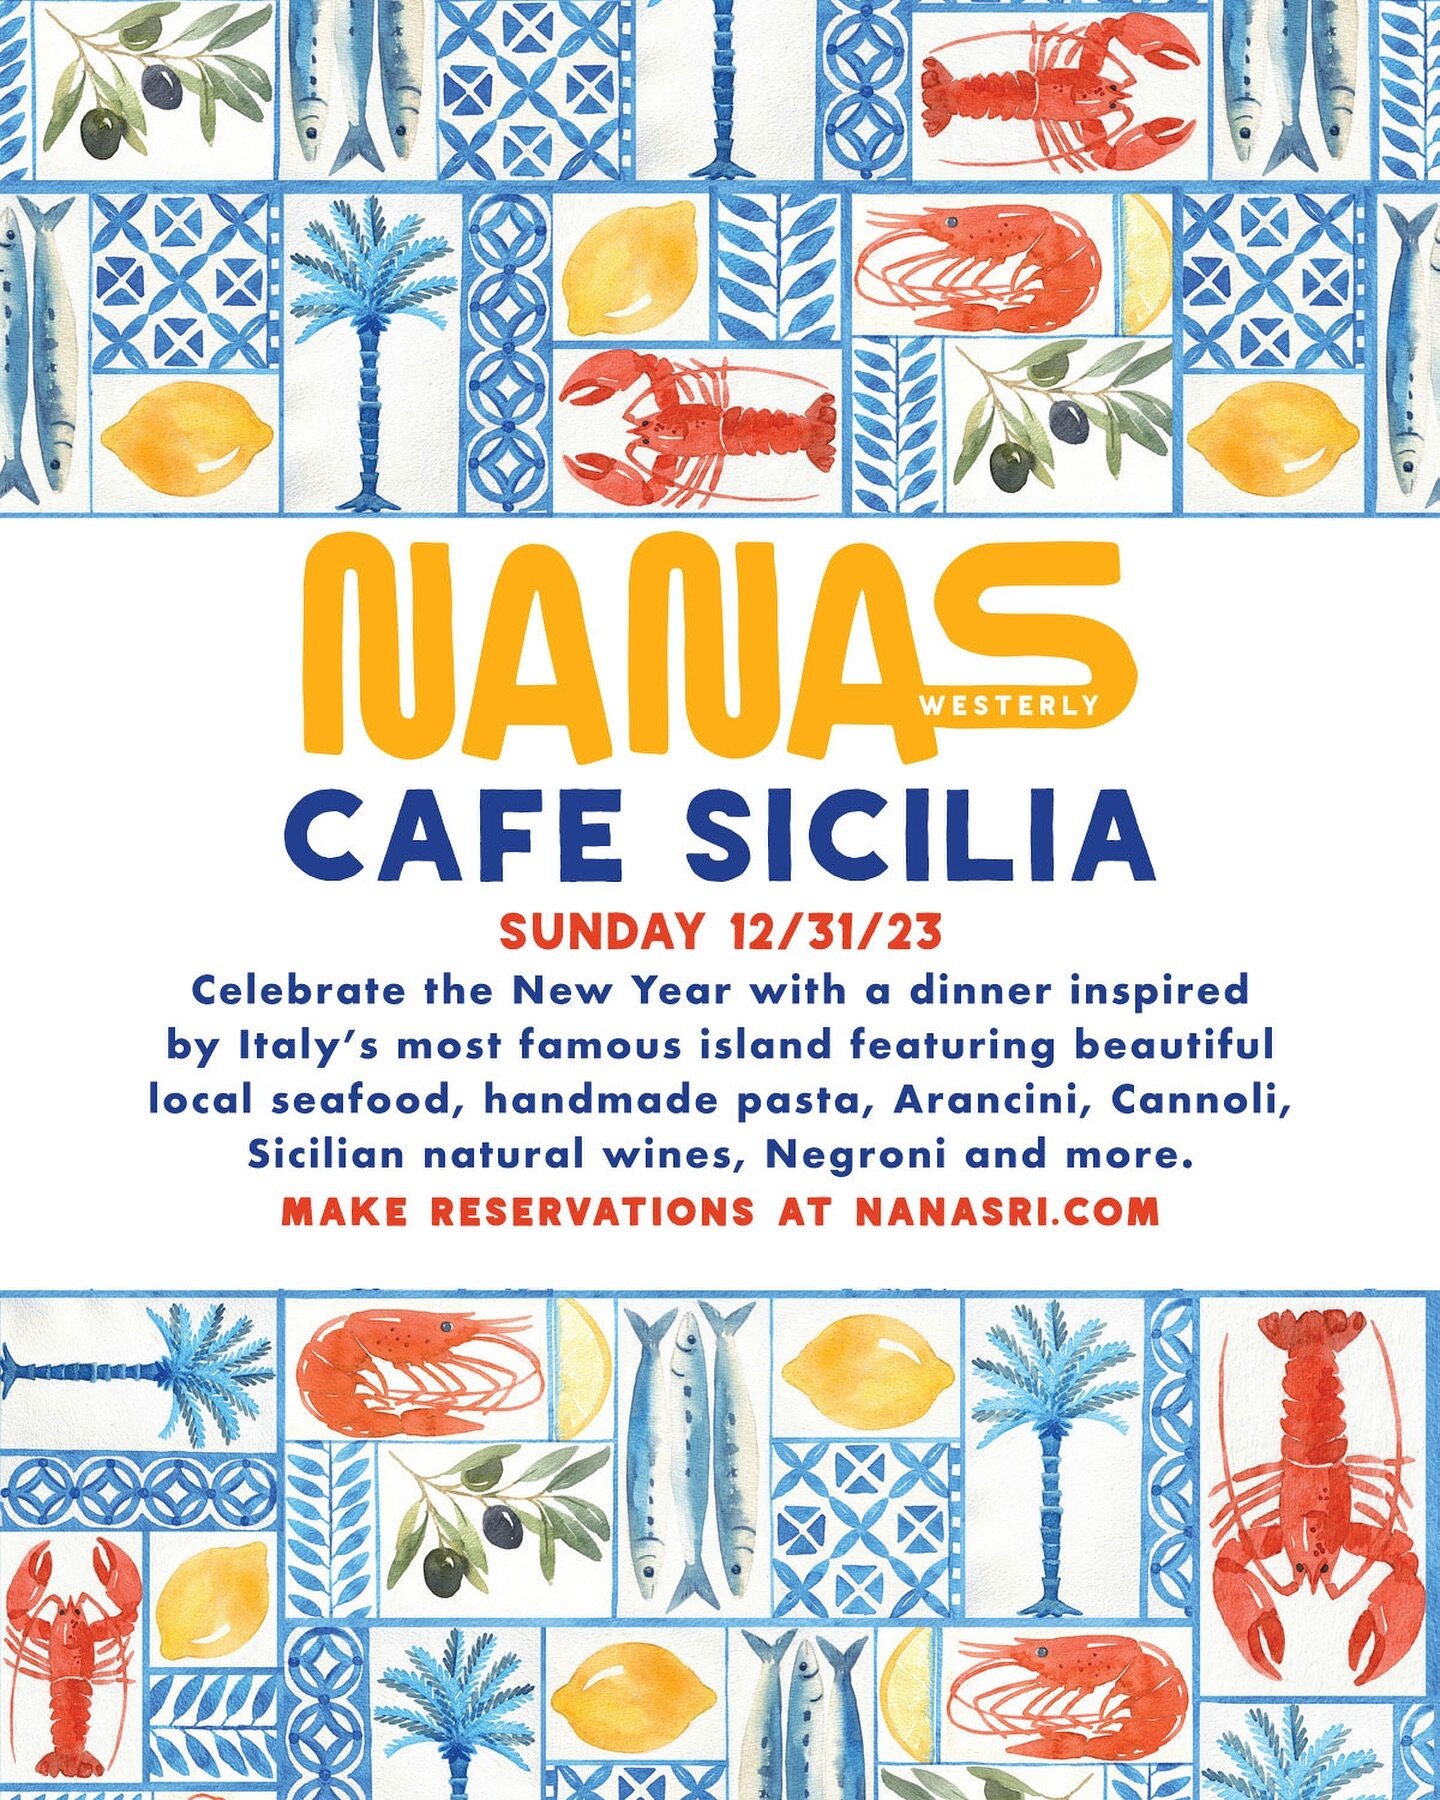 Join us for a New Year&rsquo;s Eve celebration, Cafe Sicilia 🦐🫒🍋🥂

The menu will be inspired by Italy&rsquo;s most famous island, with local seafood, handmade pasta, and more &mdash; make reservations on our website, link in bio!